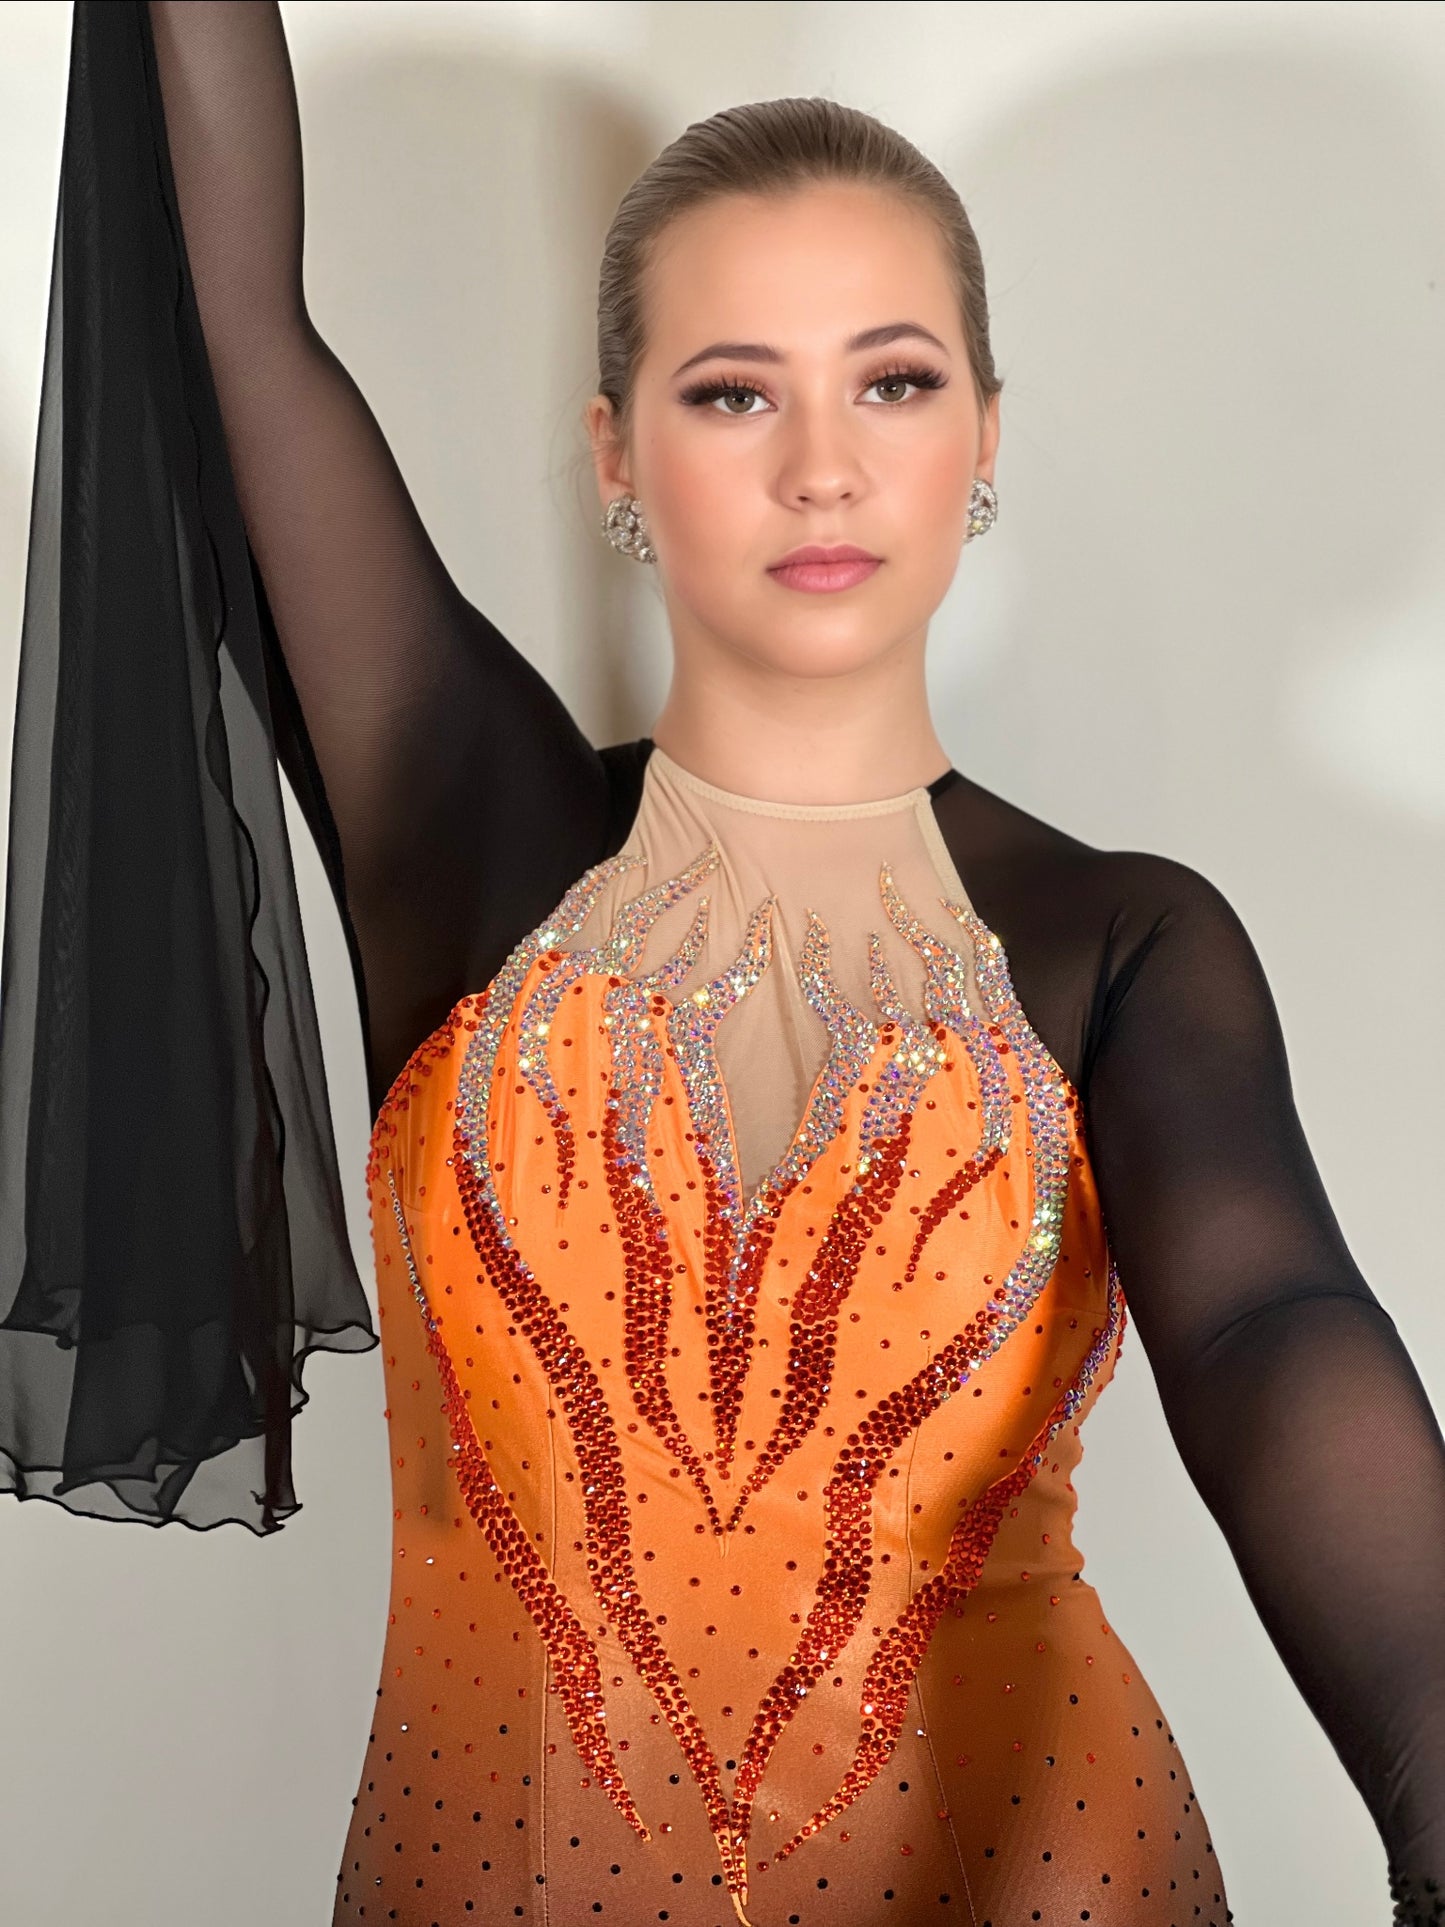 0007 Orange & Black Ombre bodice Ballroom Dress. Keyhole filled in flesh detail to the back with flesh high neck. Detachable floats to the sleeve cuff. Stoned in Siam, Hyacinth & jet.